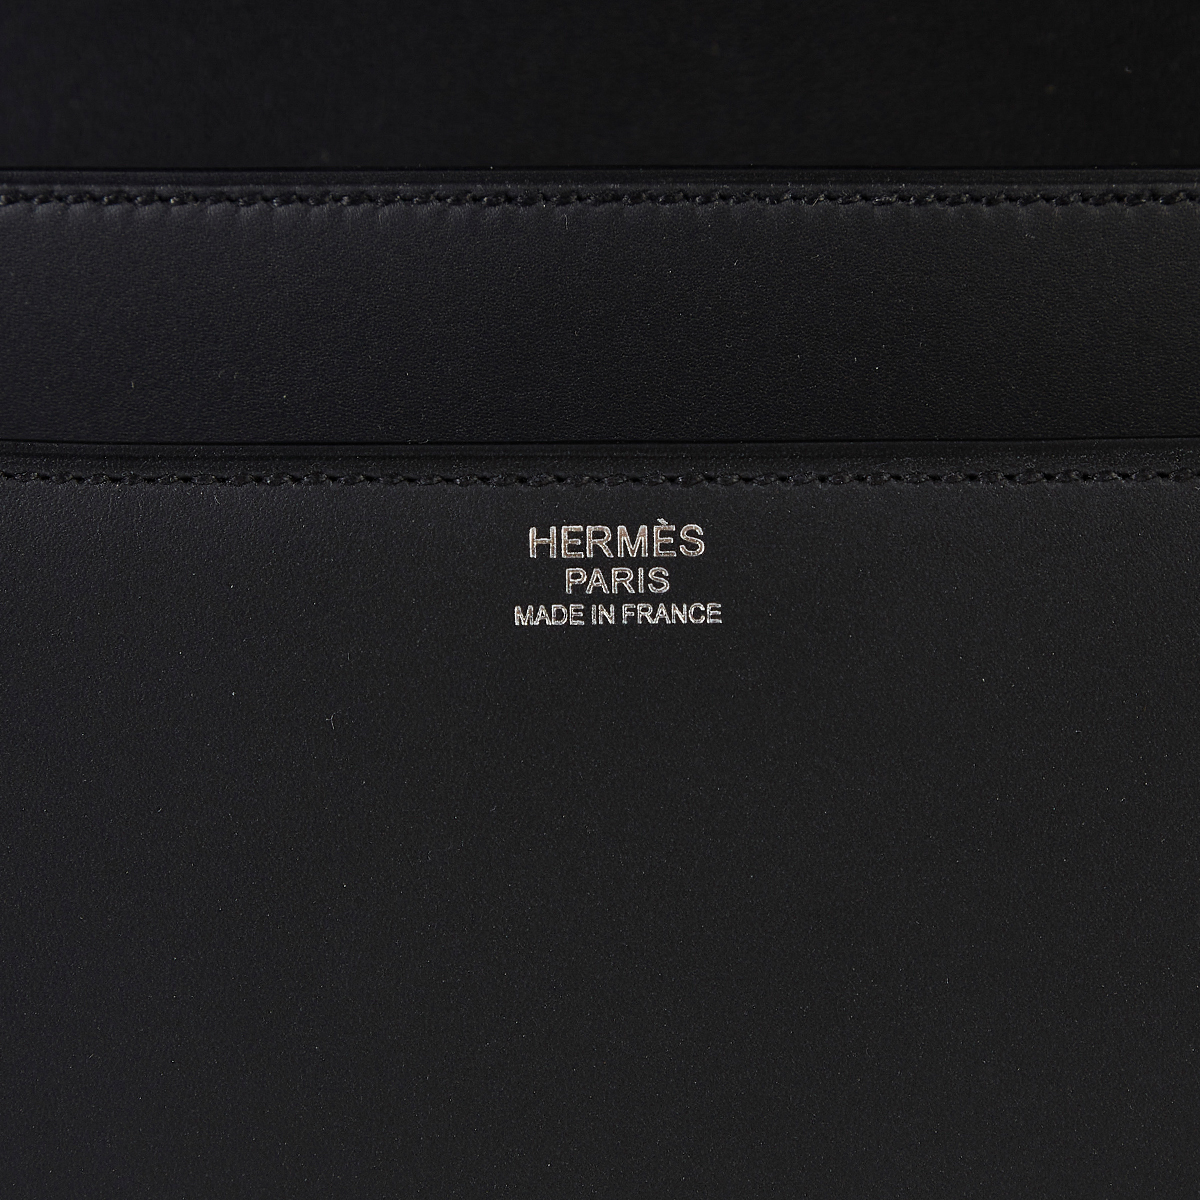 LIMITED EDITION HERMES CONSTANCE CARTABLE Blue OBSCURE HARDWARE SUPERSIZE